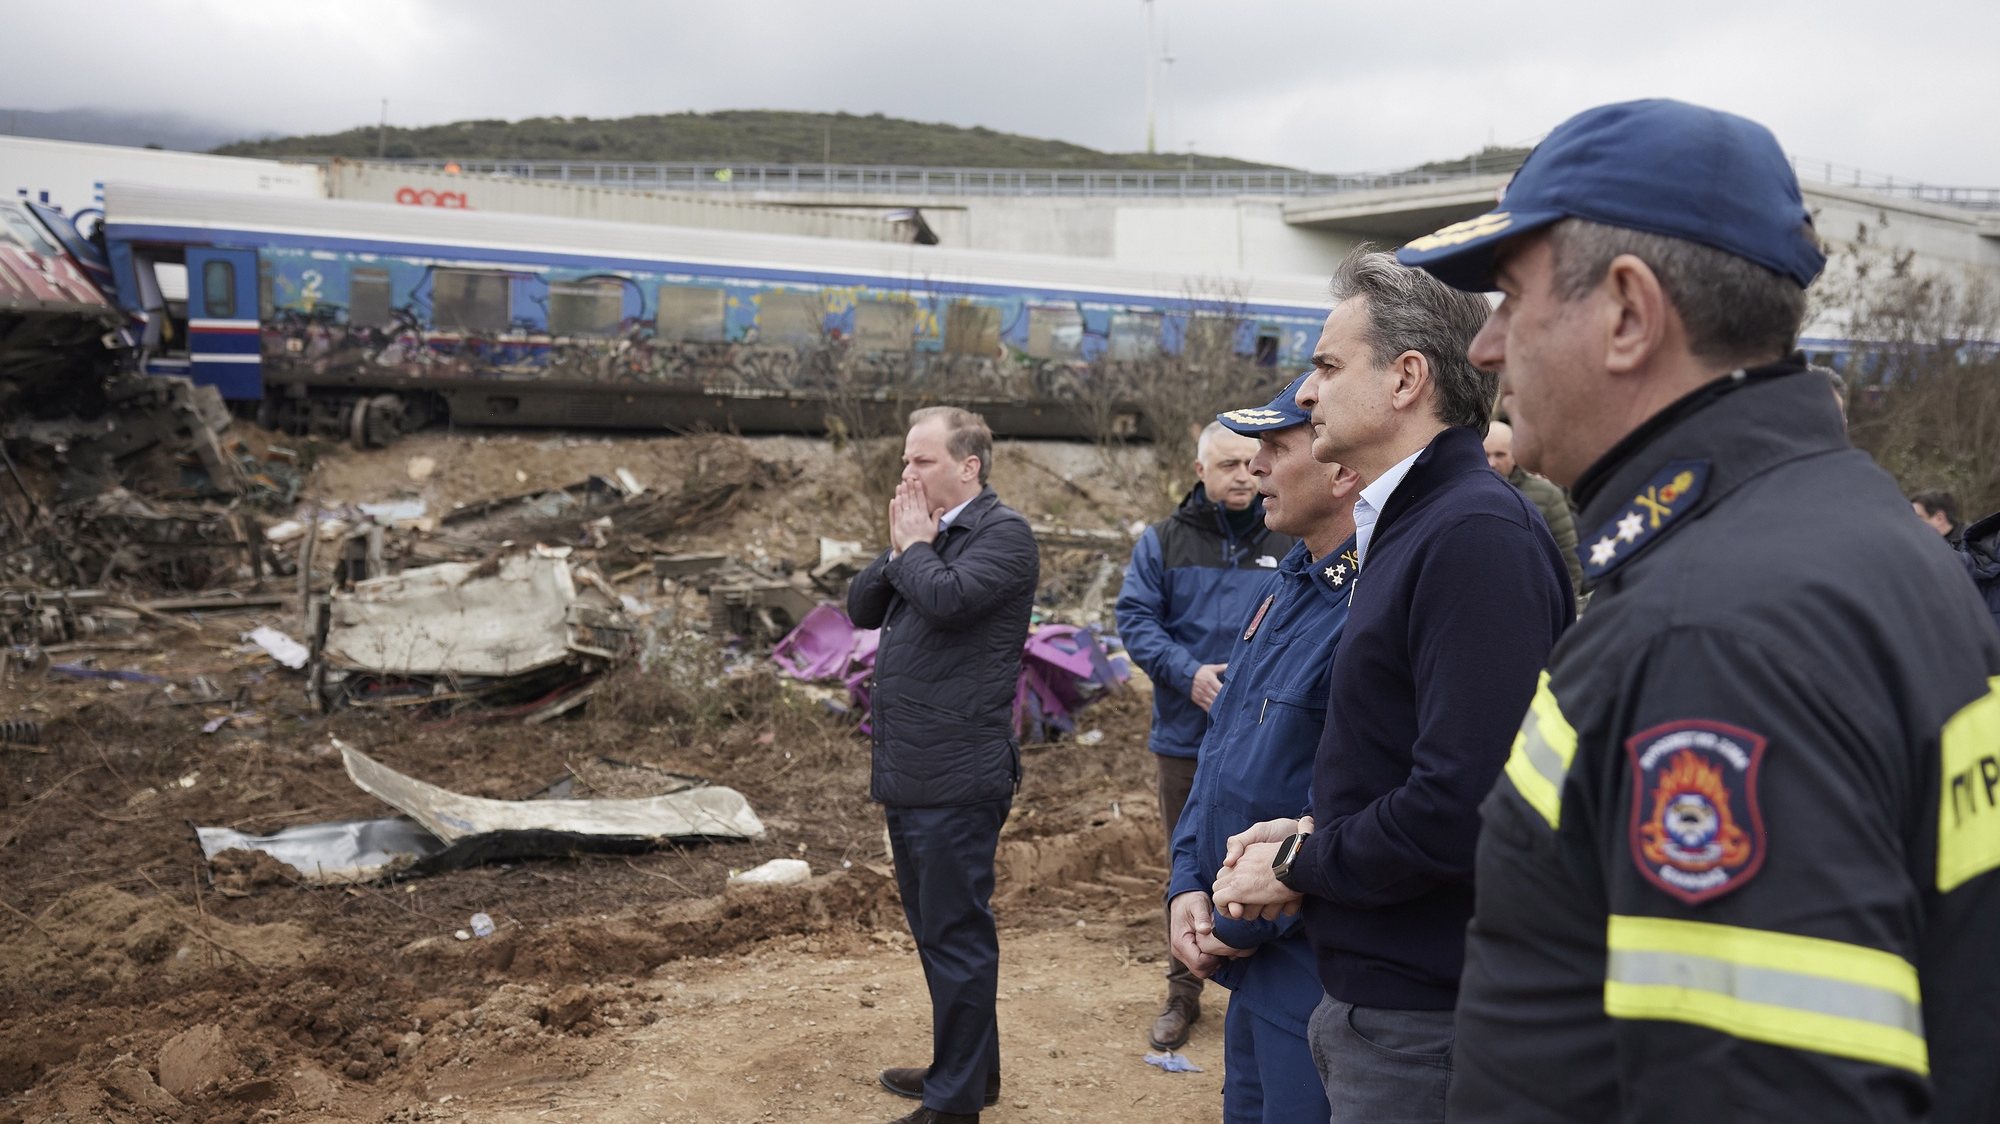 epa10497198 A handout photo made available by Greek Prime Minister&#039;s Press Office shows Prime Minister Kyriakos Mitsotakis (2-R) and Greek Minister of Infrastructure &amp; Transport Kostas Karamanlis (L) reacting at the scene of a train collision, near Larissa city, Greece, 01 March 2023. Infrastructure &amp; Transport Minister Kostas Karamanlis resigned on 01 March, following the fatal train crash. According to the latest update by the fire brigade spokesperson Vasilis Vathrakogiannis, the death toll was 36 so far and 66 people had been taken to hospital, six of which were admitted to ICUs.  EPA/DIMITRIS PAPAMITSOS / GREECE PRIME MISNISTER / HANDOUT HANDOUT  HANDOUT EDITORIAL USE ONLY/NO SALES